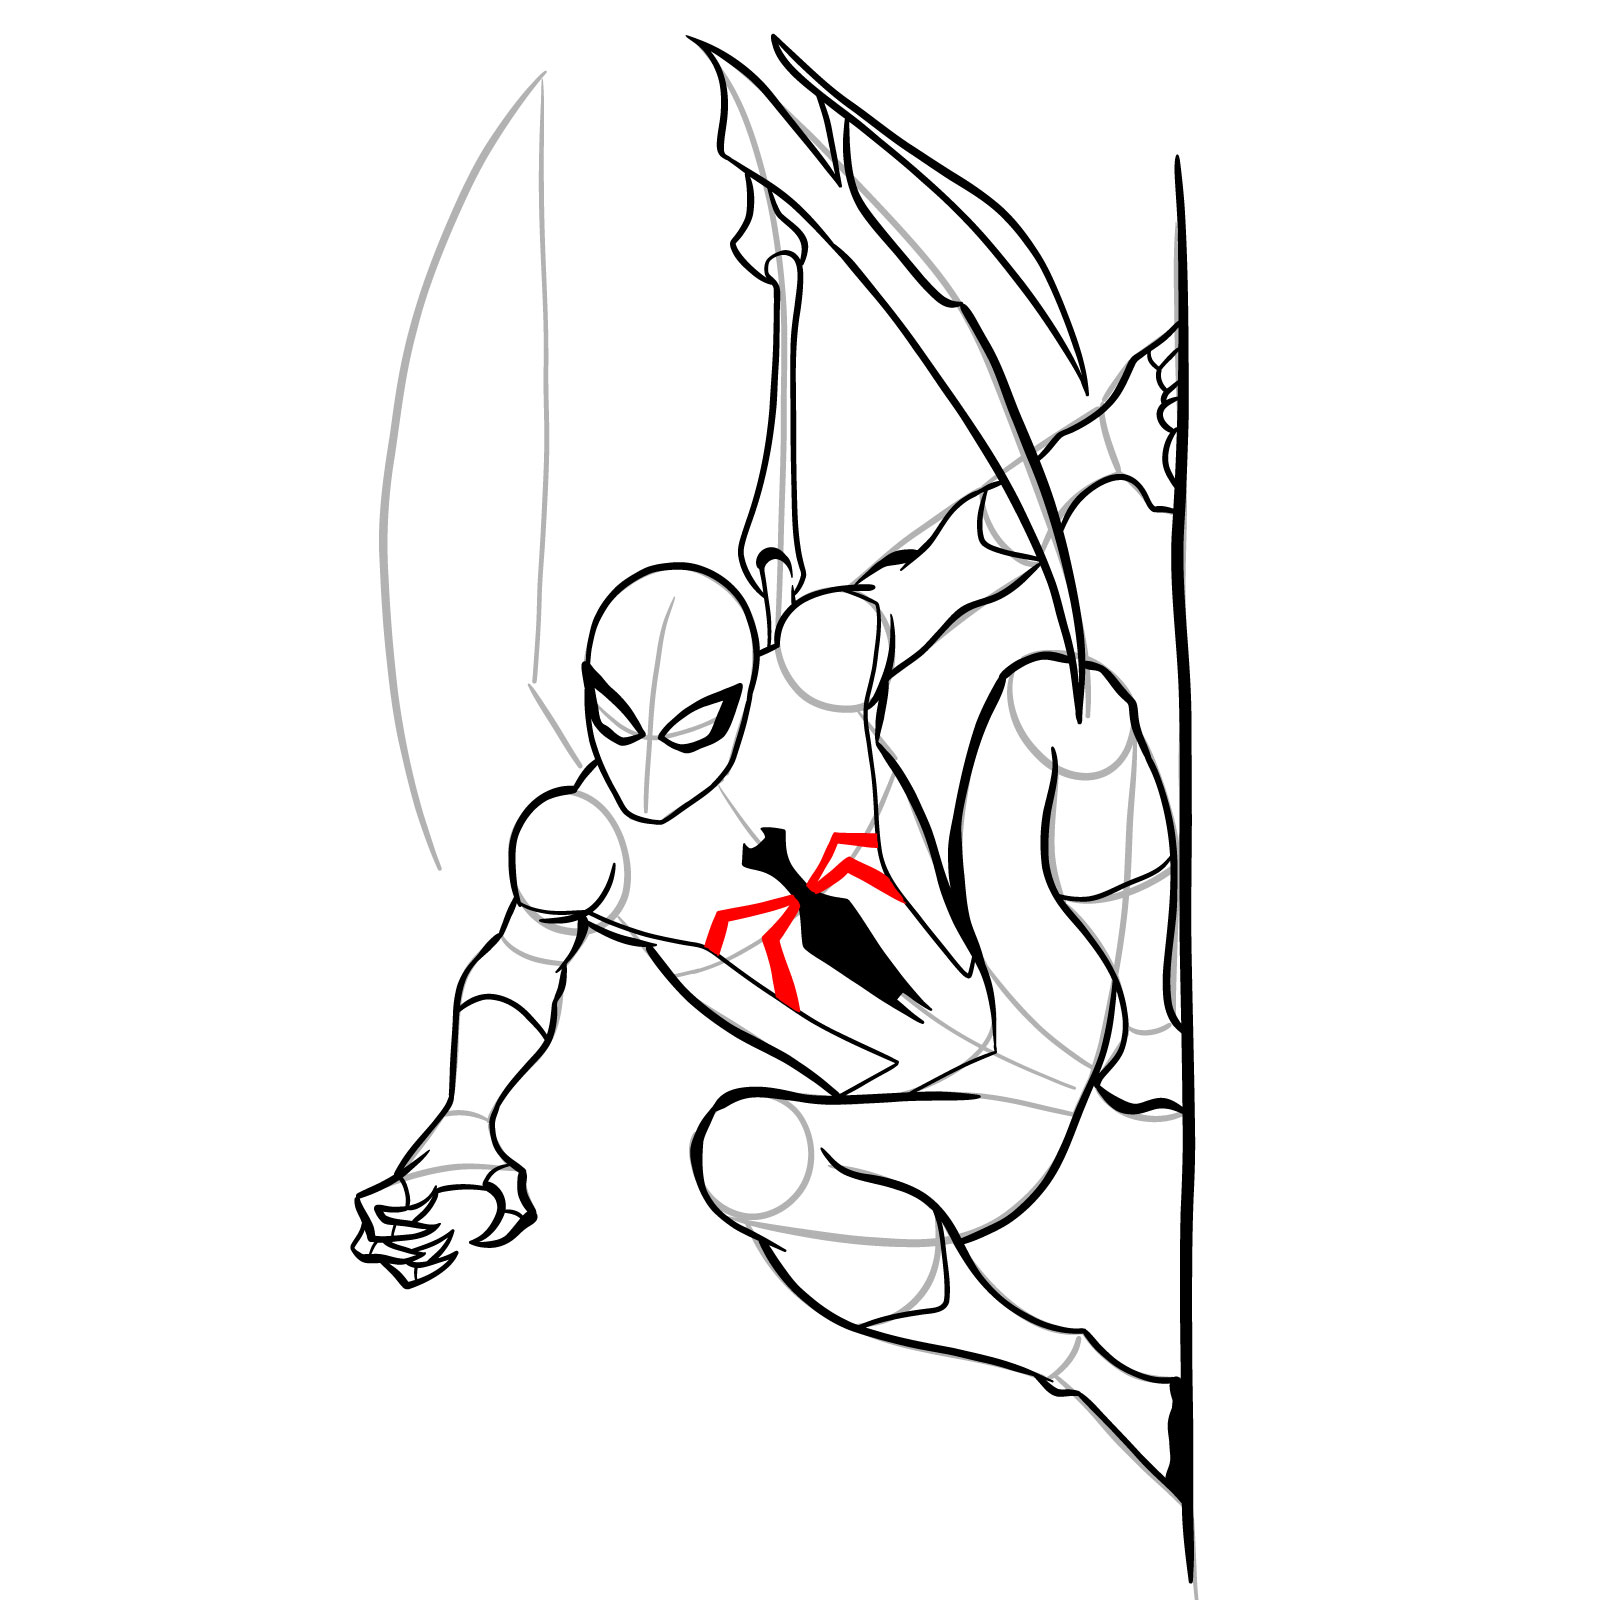 How to draw The Superior Spider-Man - step 31